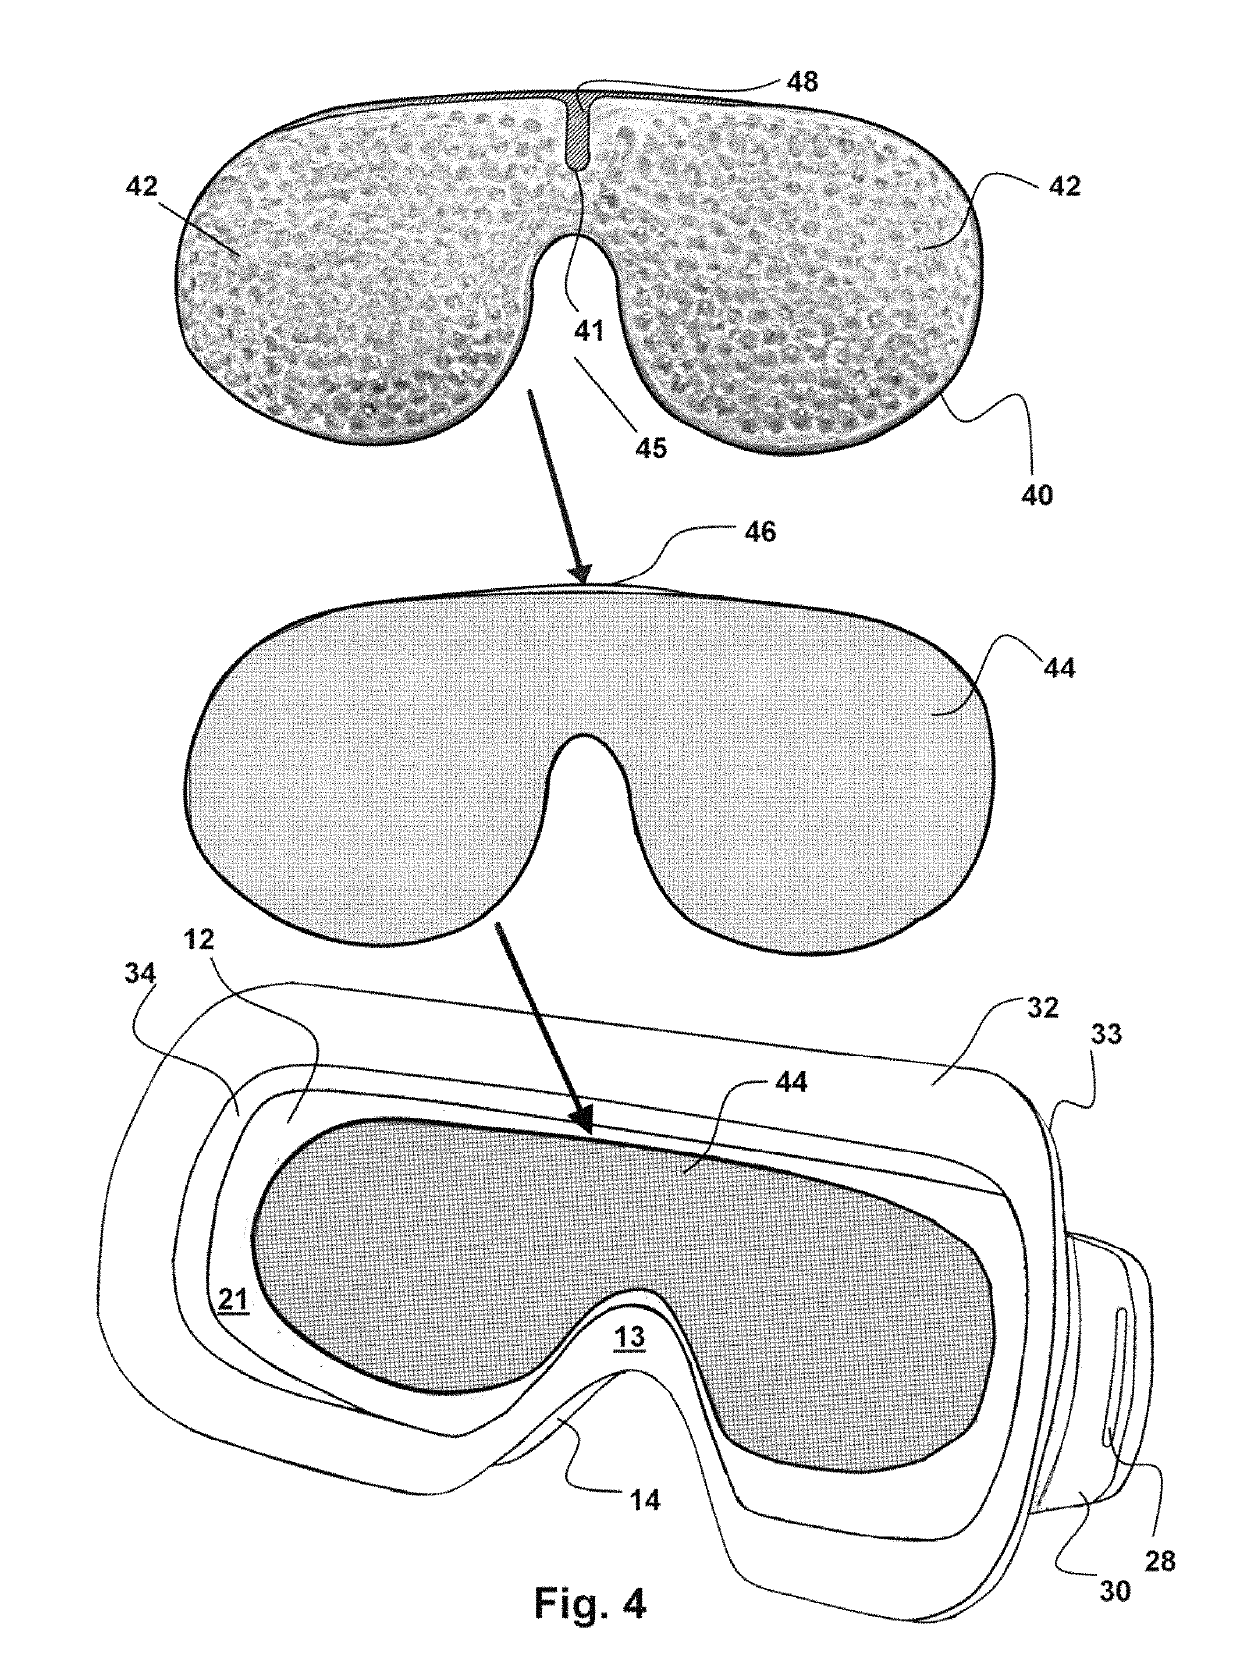 System for treatment of eye conditions